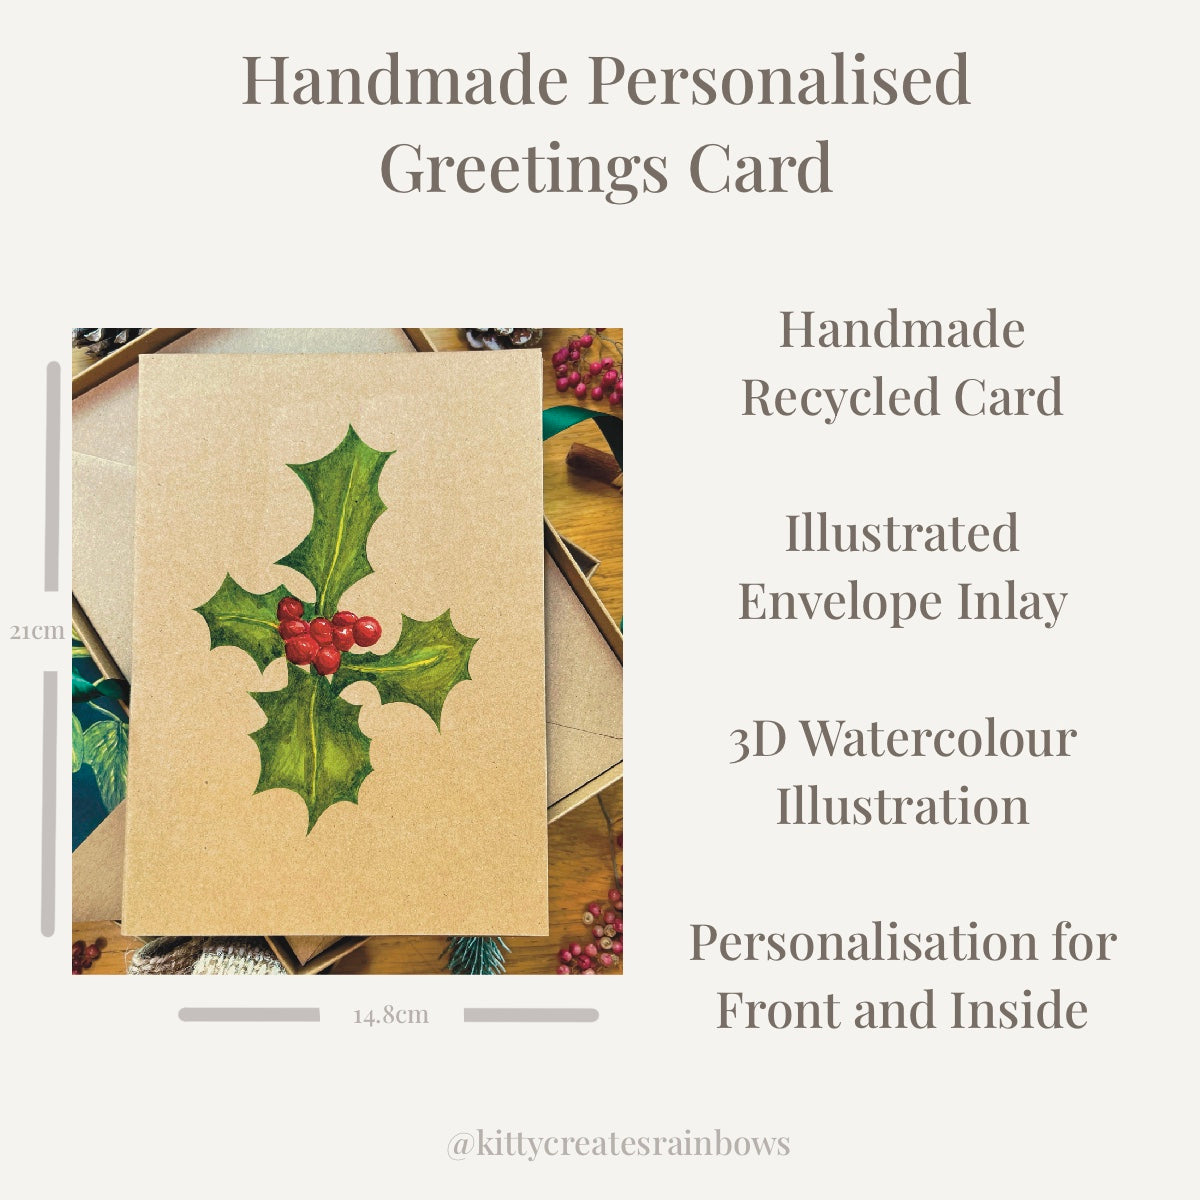 Holly infographic greetings card